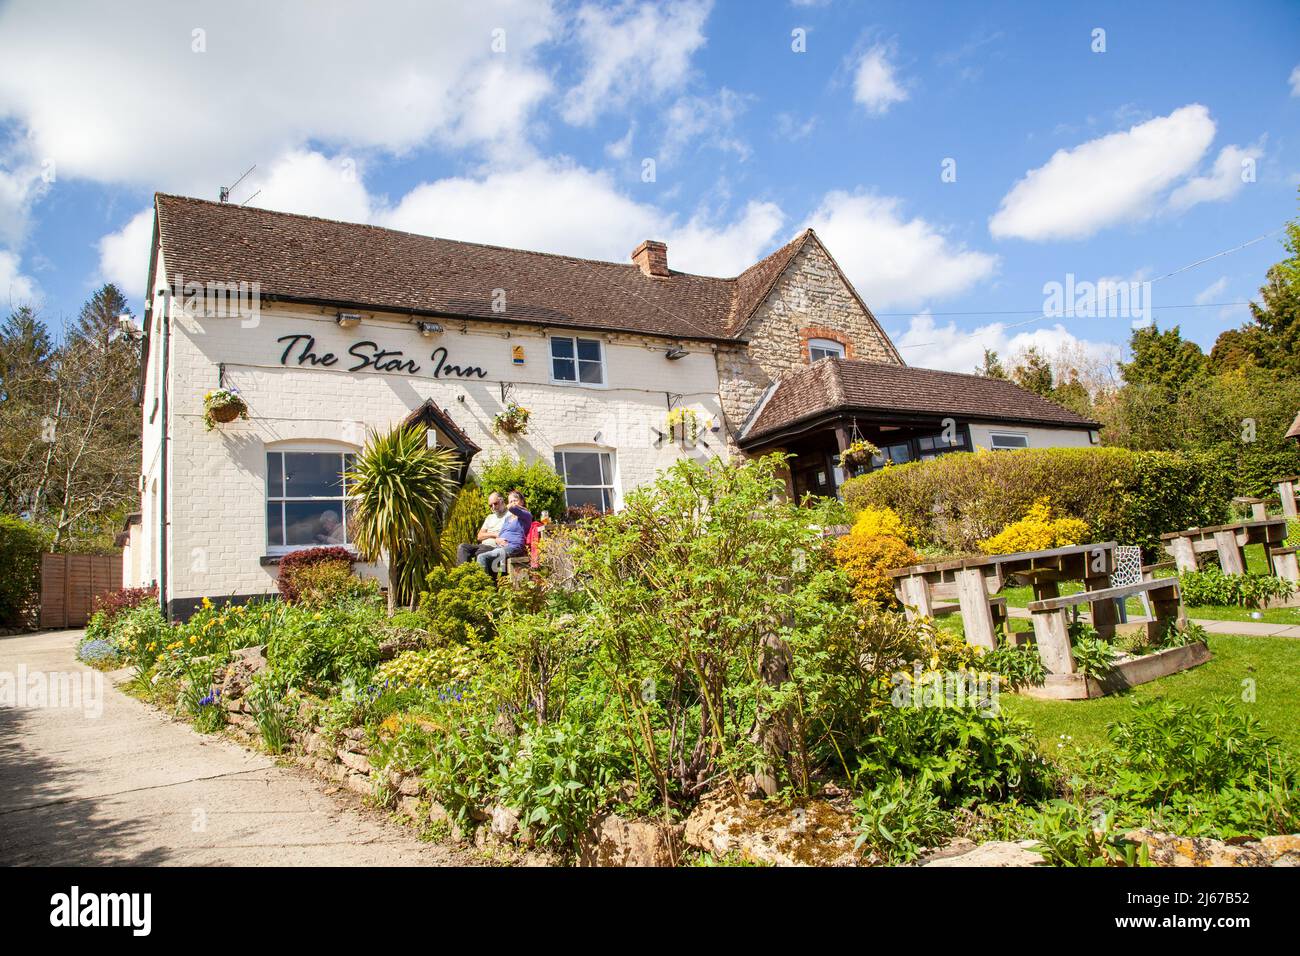 The Star inn at Ashton under Hill a village in  Worcestershire England.at the foot of the Bredon Hills Stock Photo